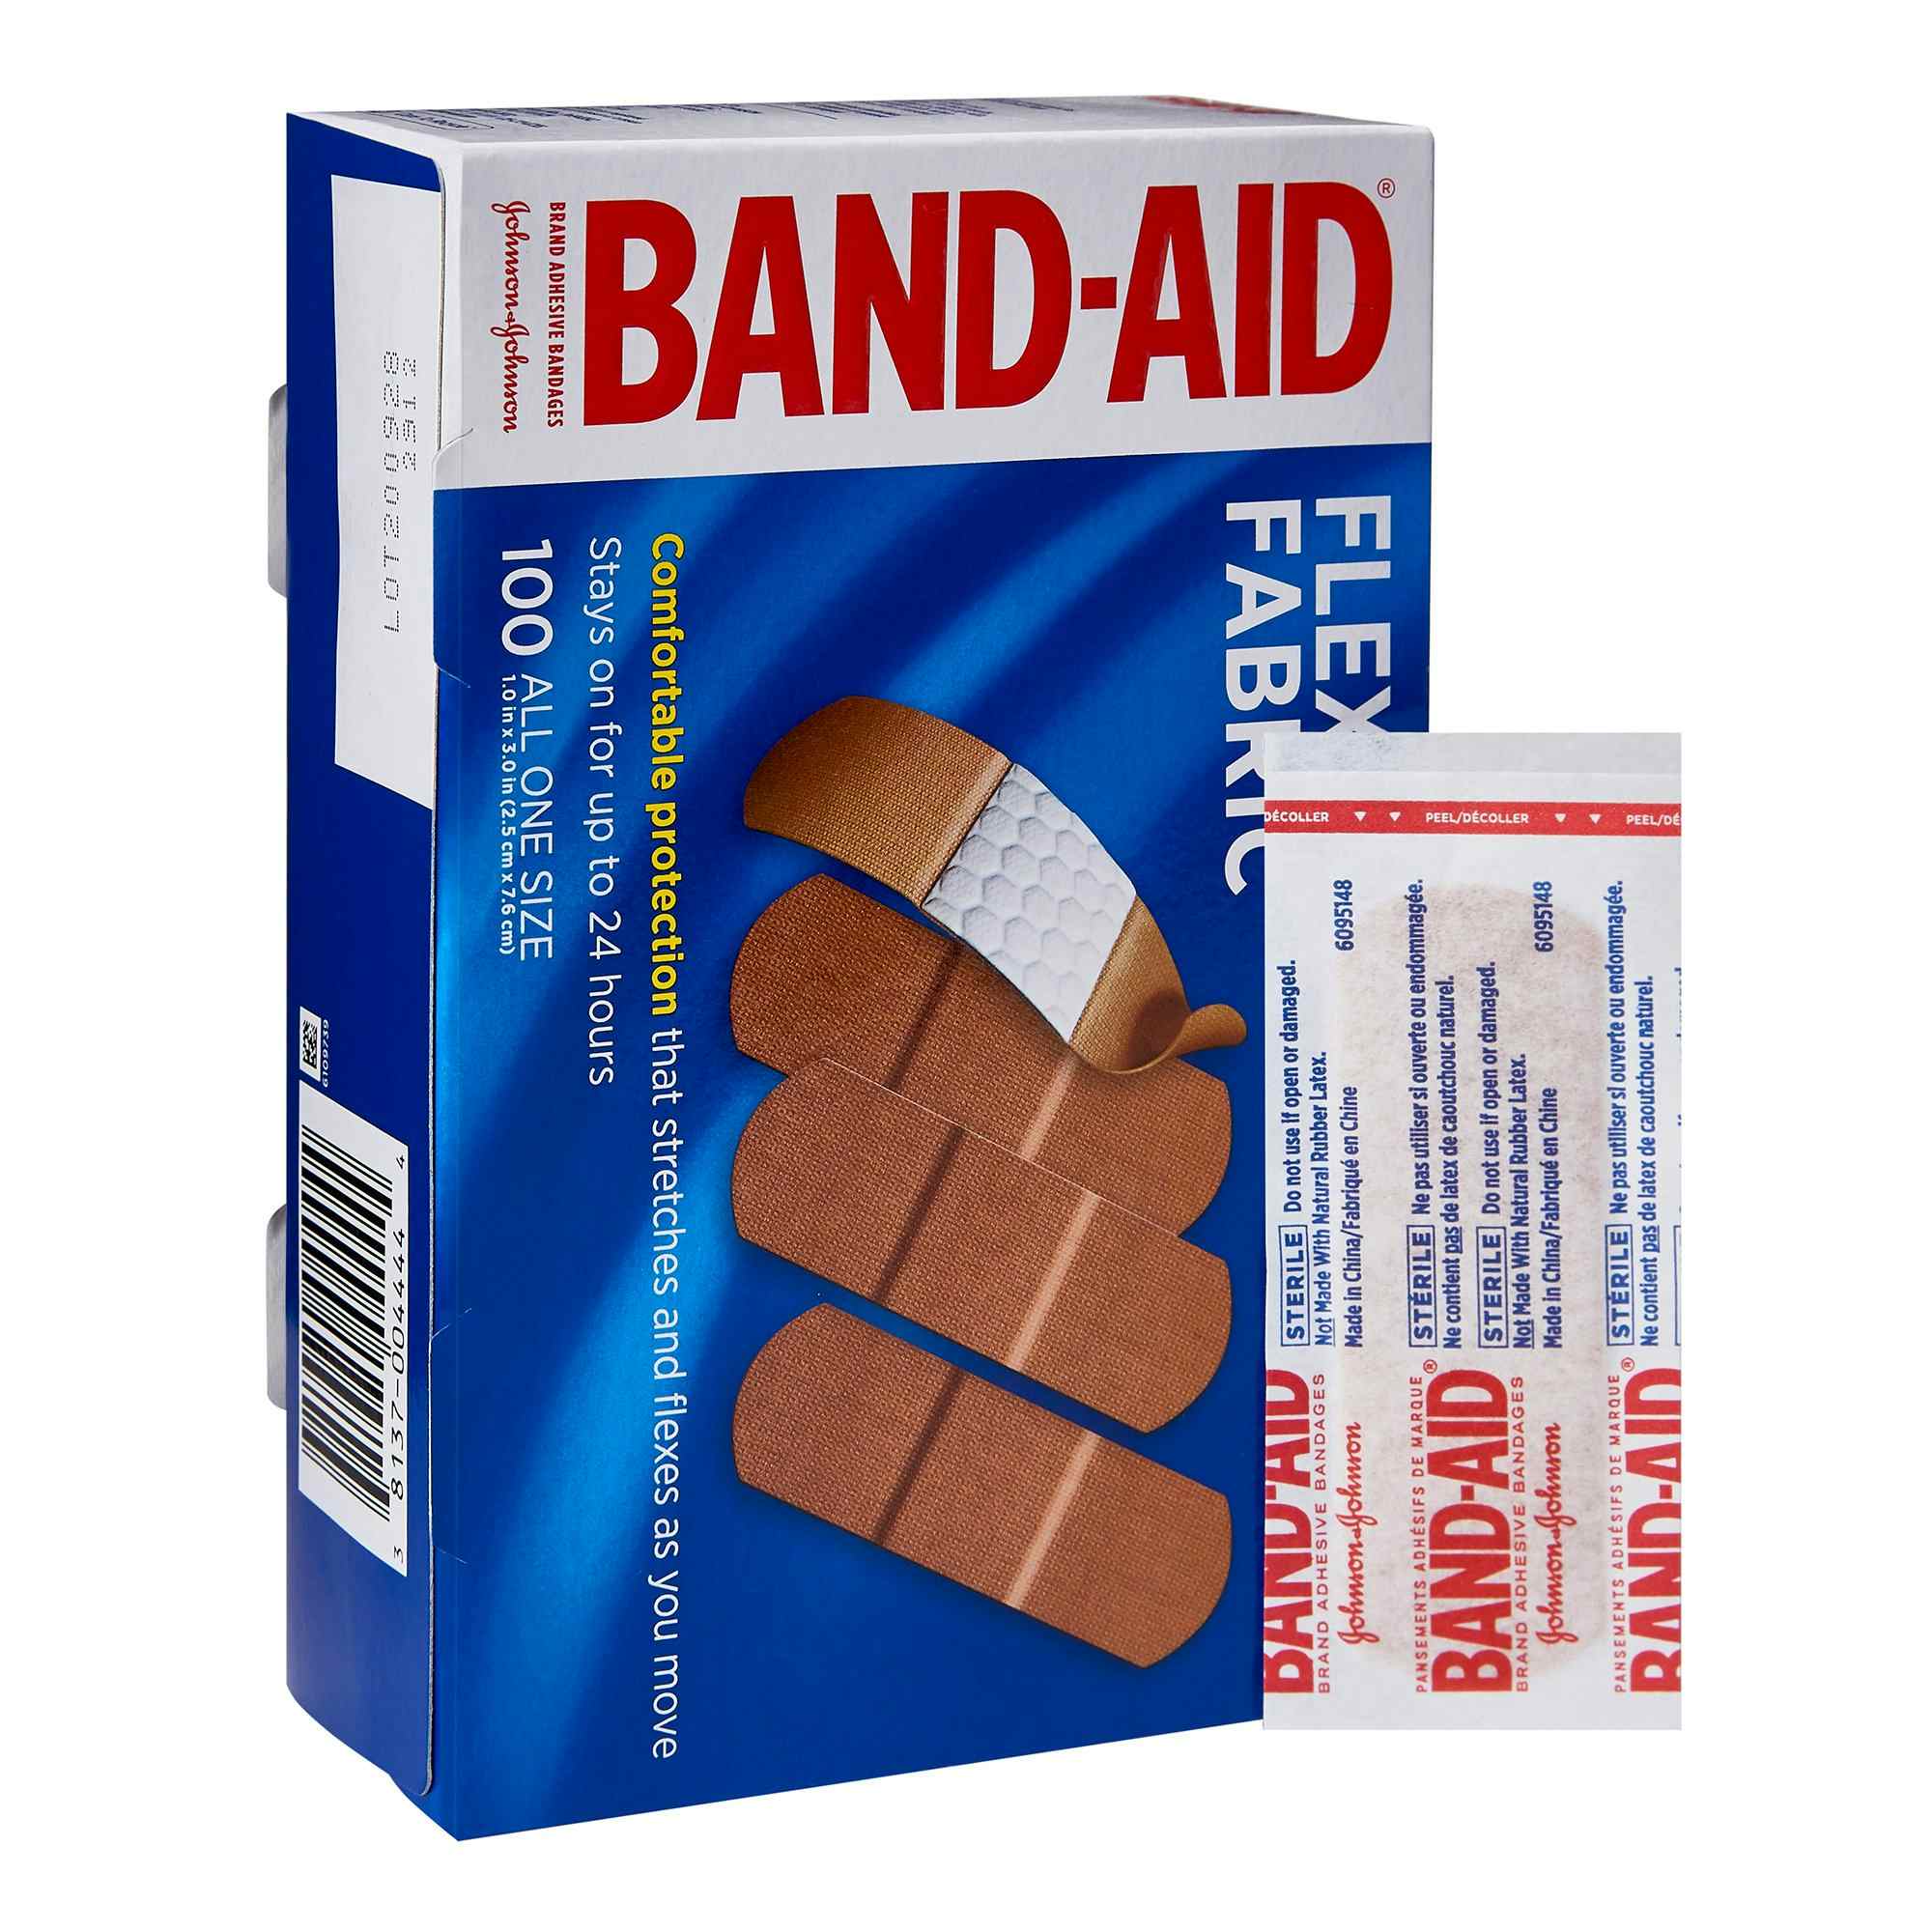 Band-Aid Flex Fabric Adhesive Bandages, All in One Size, 1 X 3", 10381370044441, Box of 100